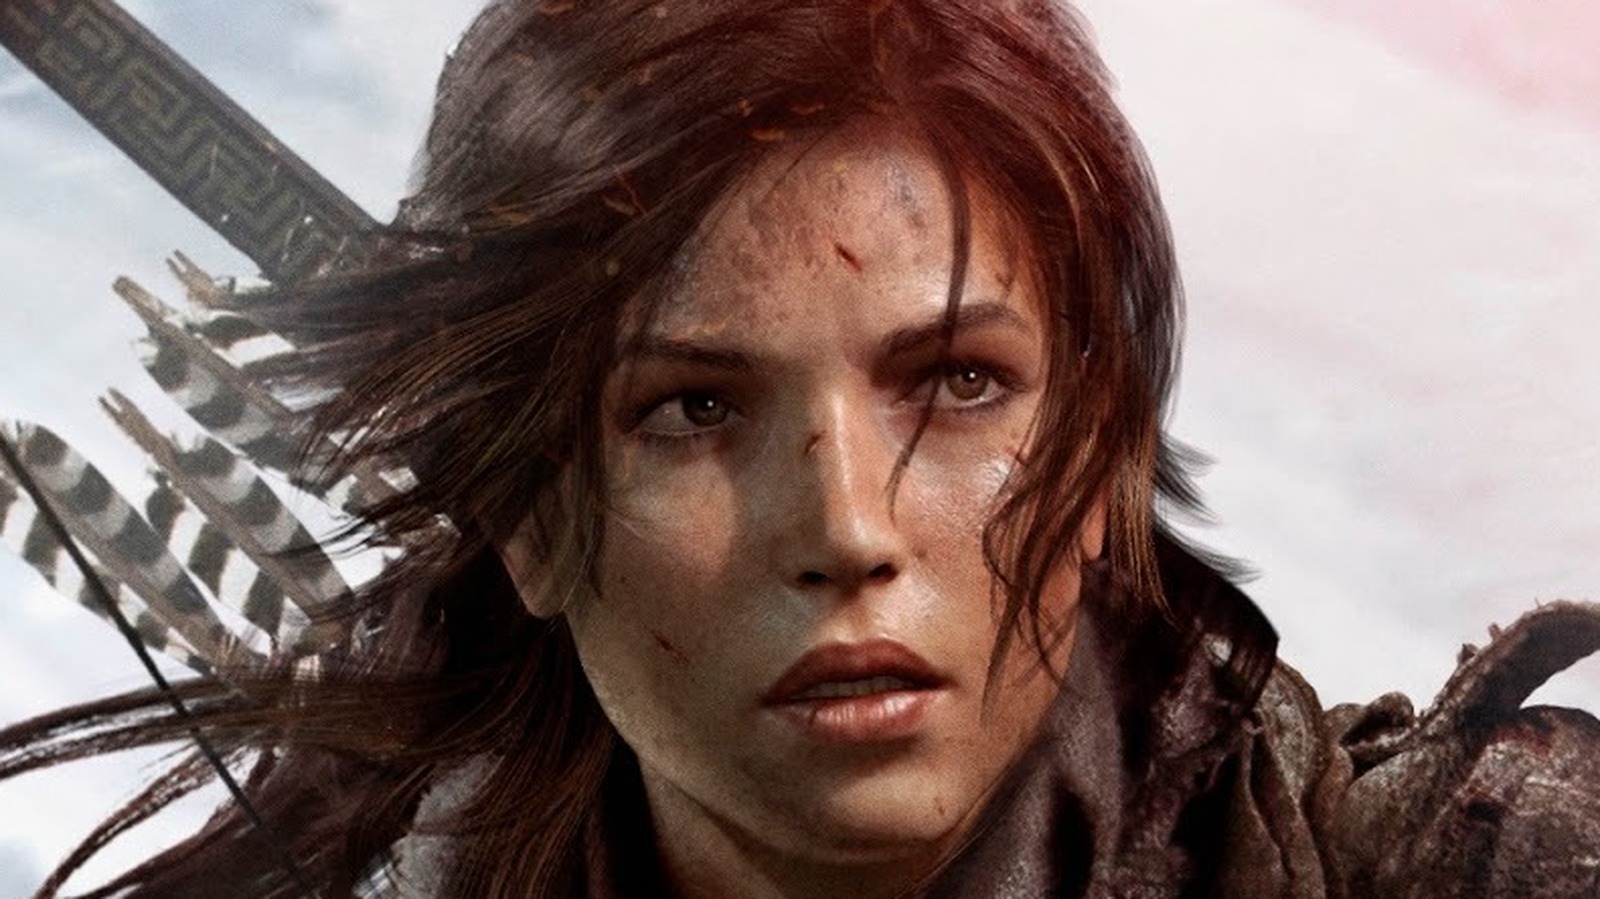 Tomb Raider is getting an animated series on Netflix from